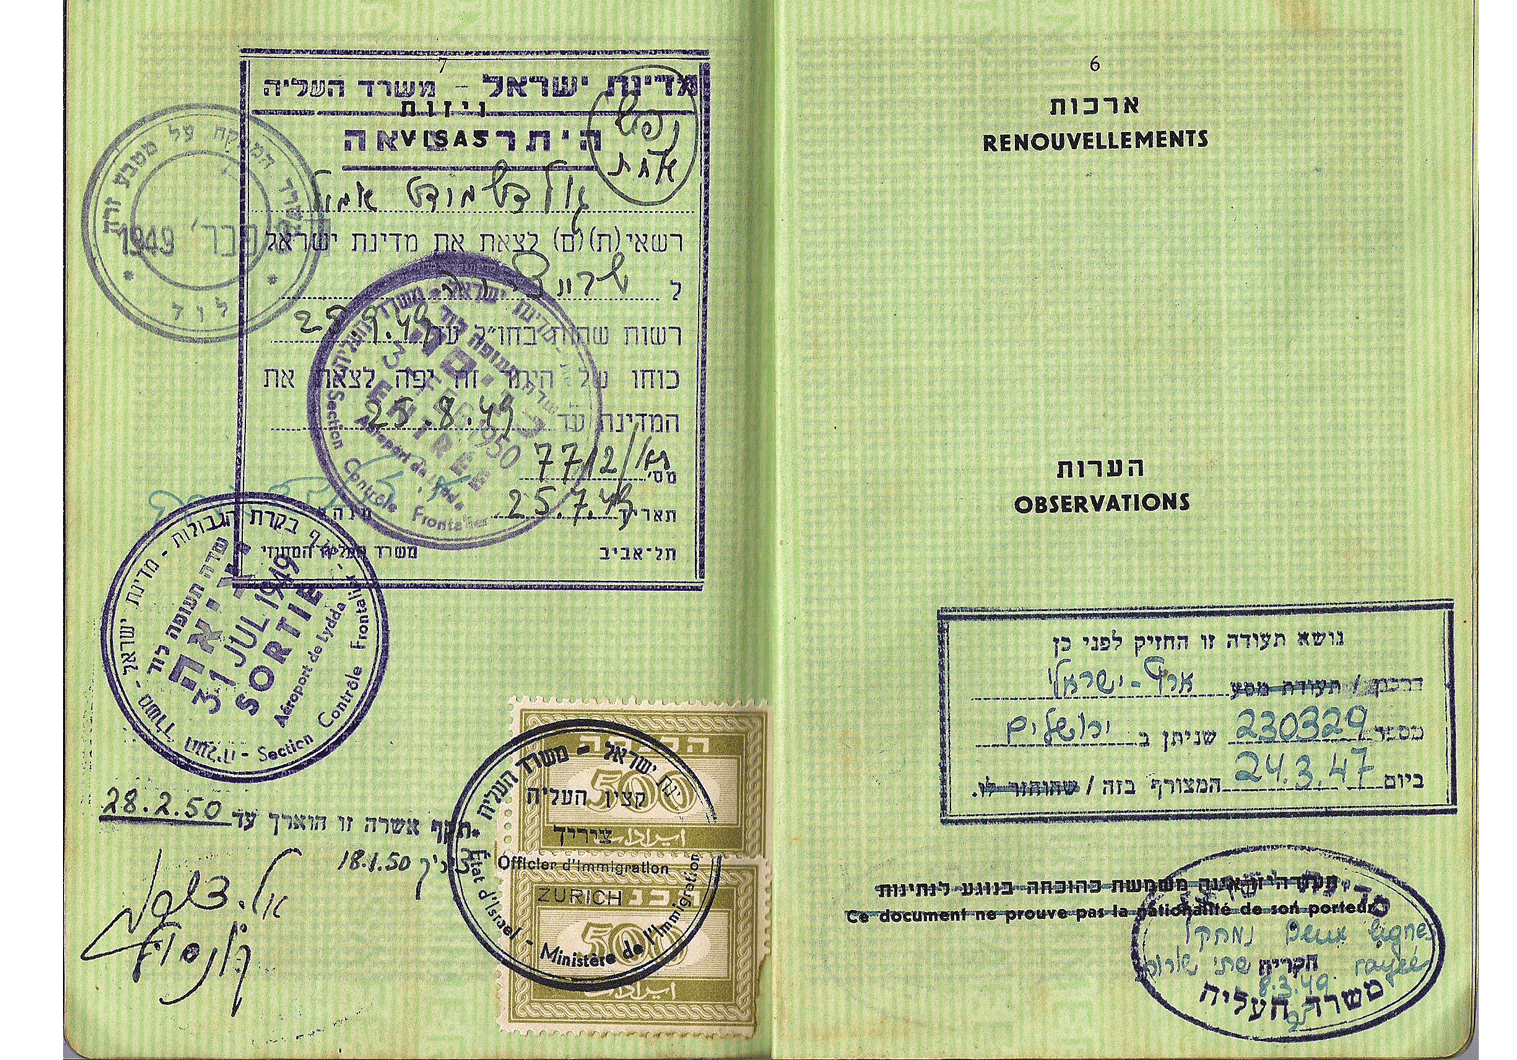 Israel consualr revenue stamp used up to 1950 inside a visa